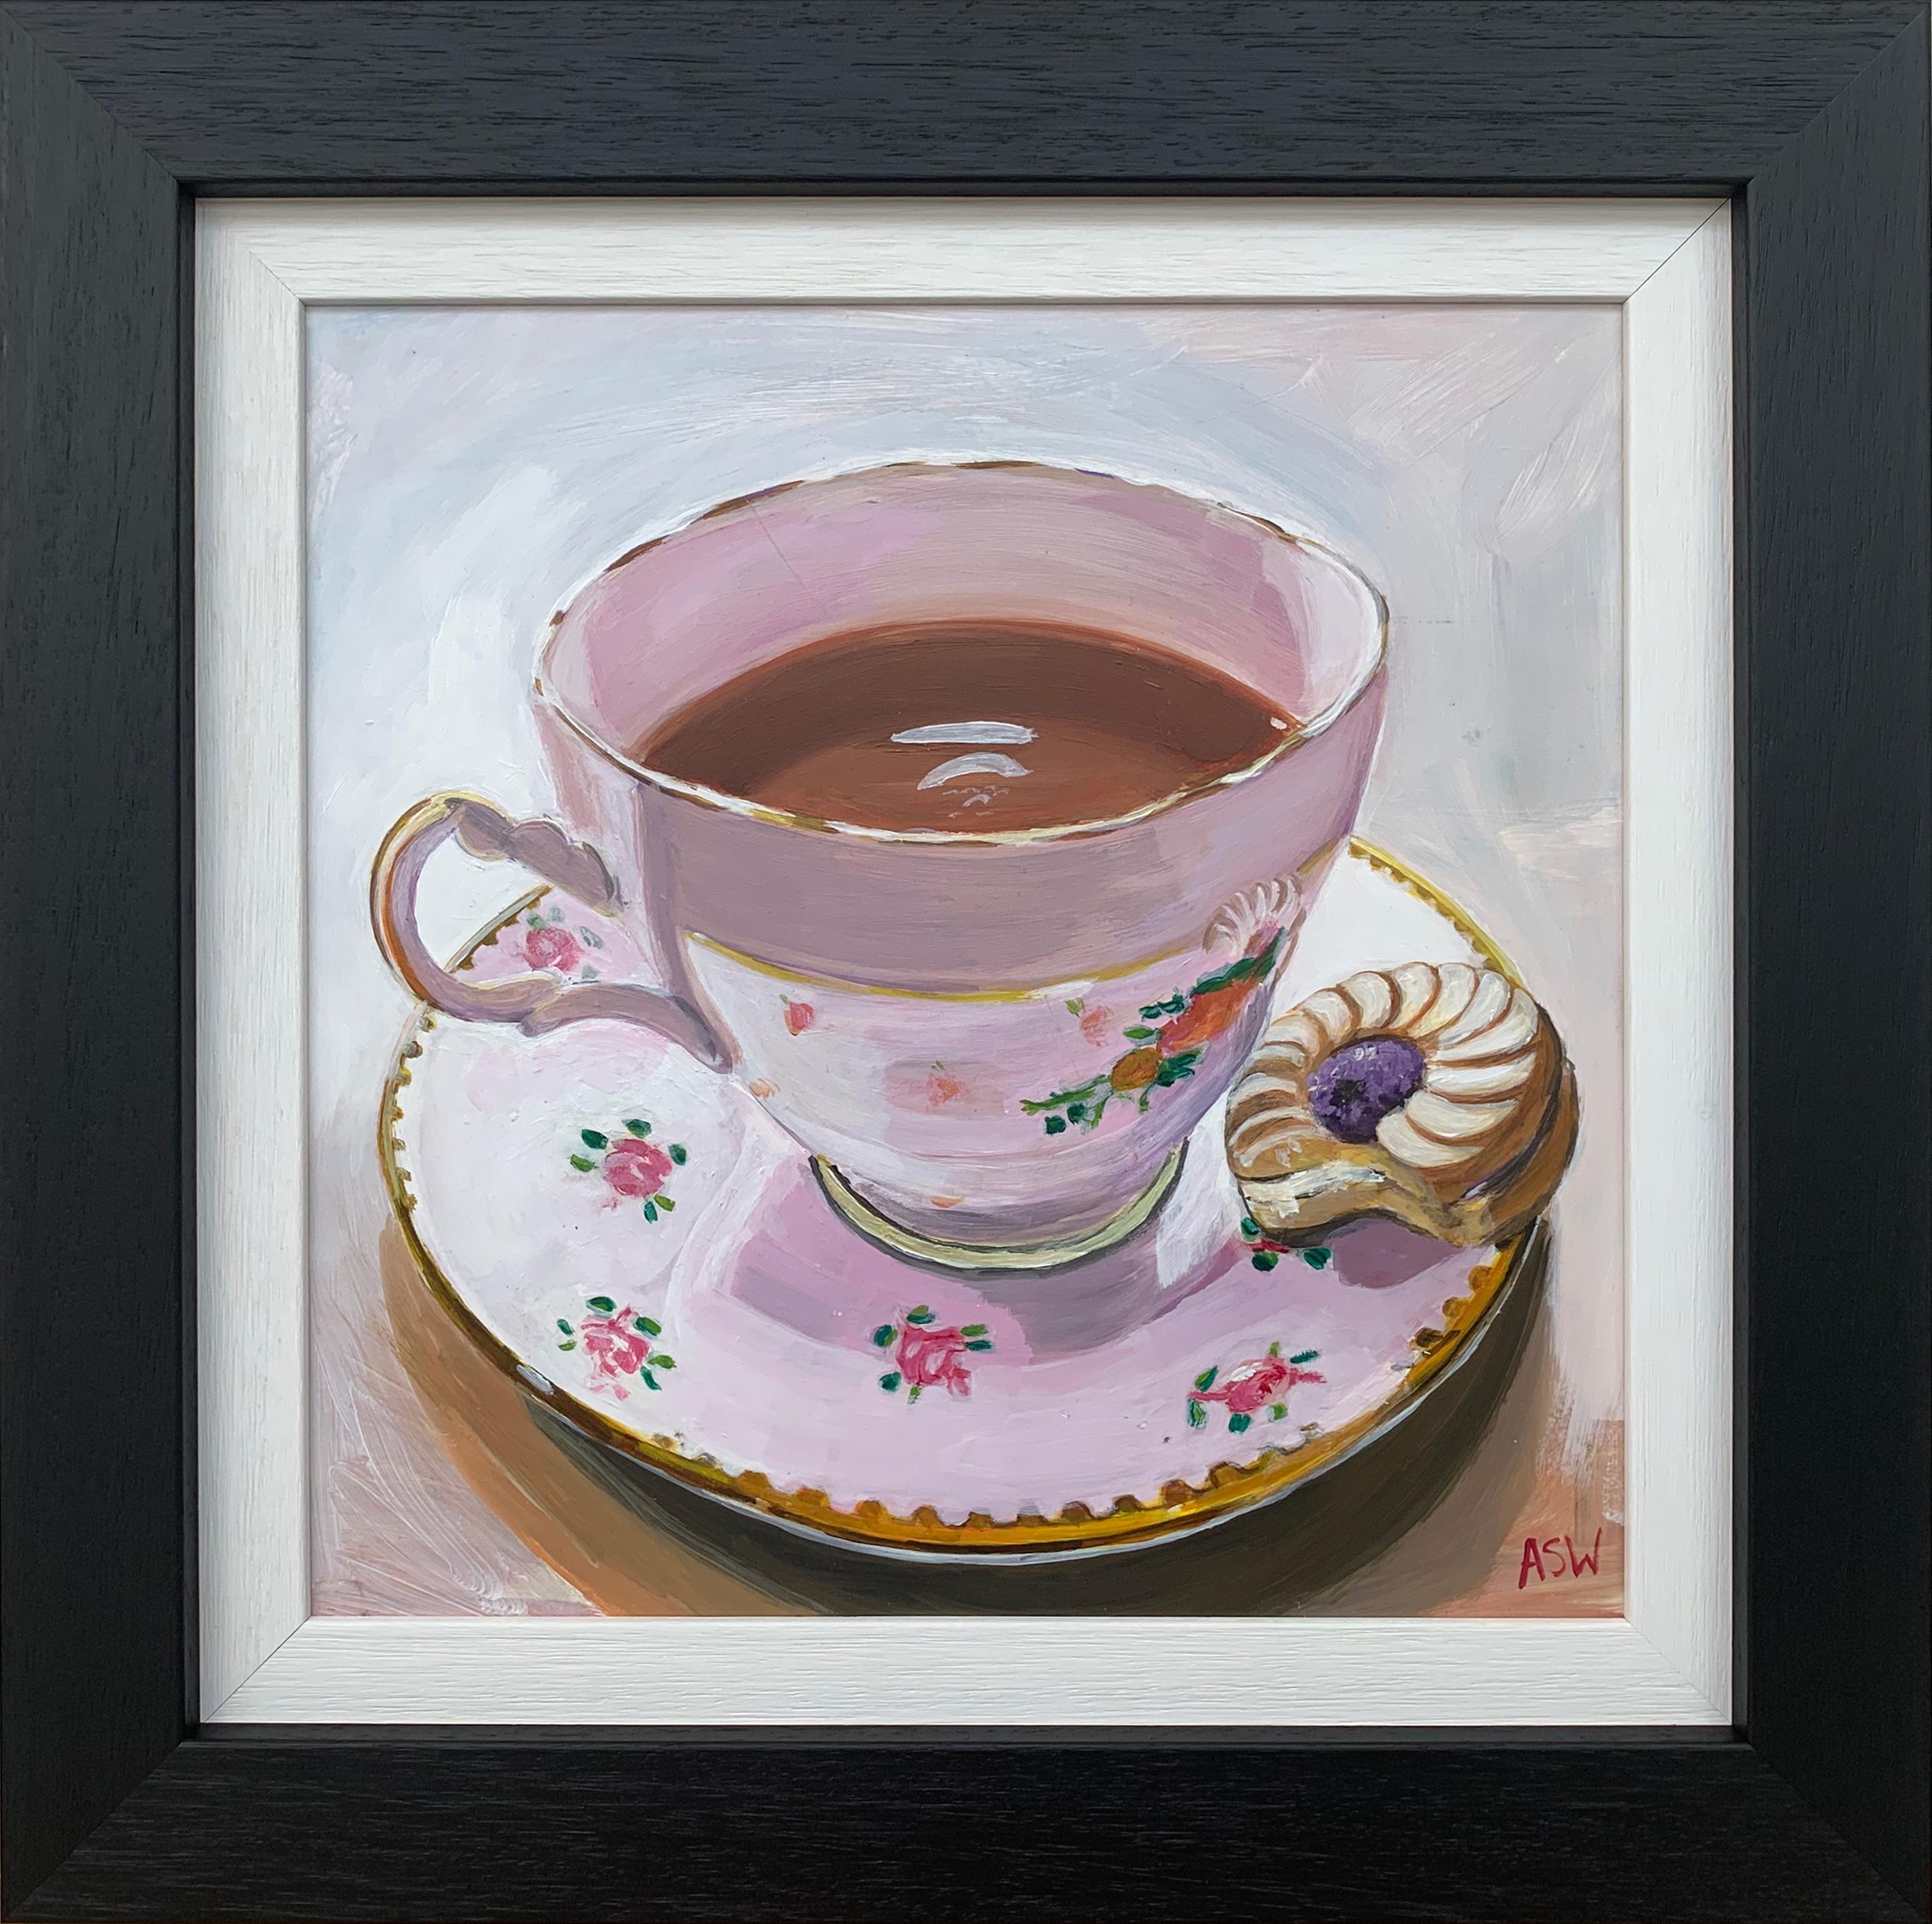 Still Life Painting of English Bone China Tea Cup & Biscuit by British Artist